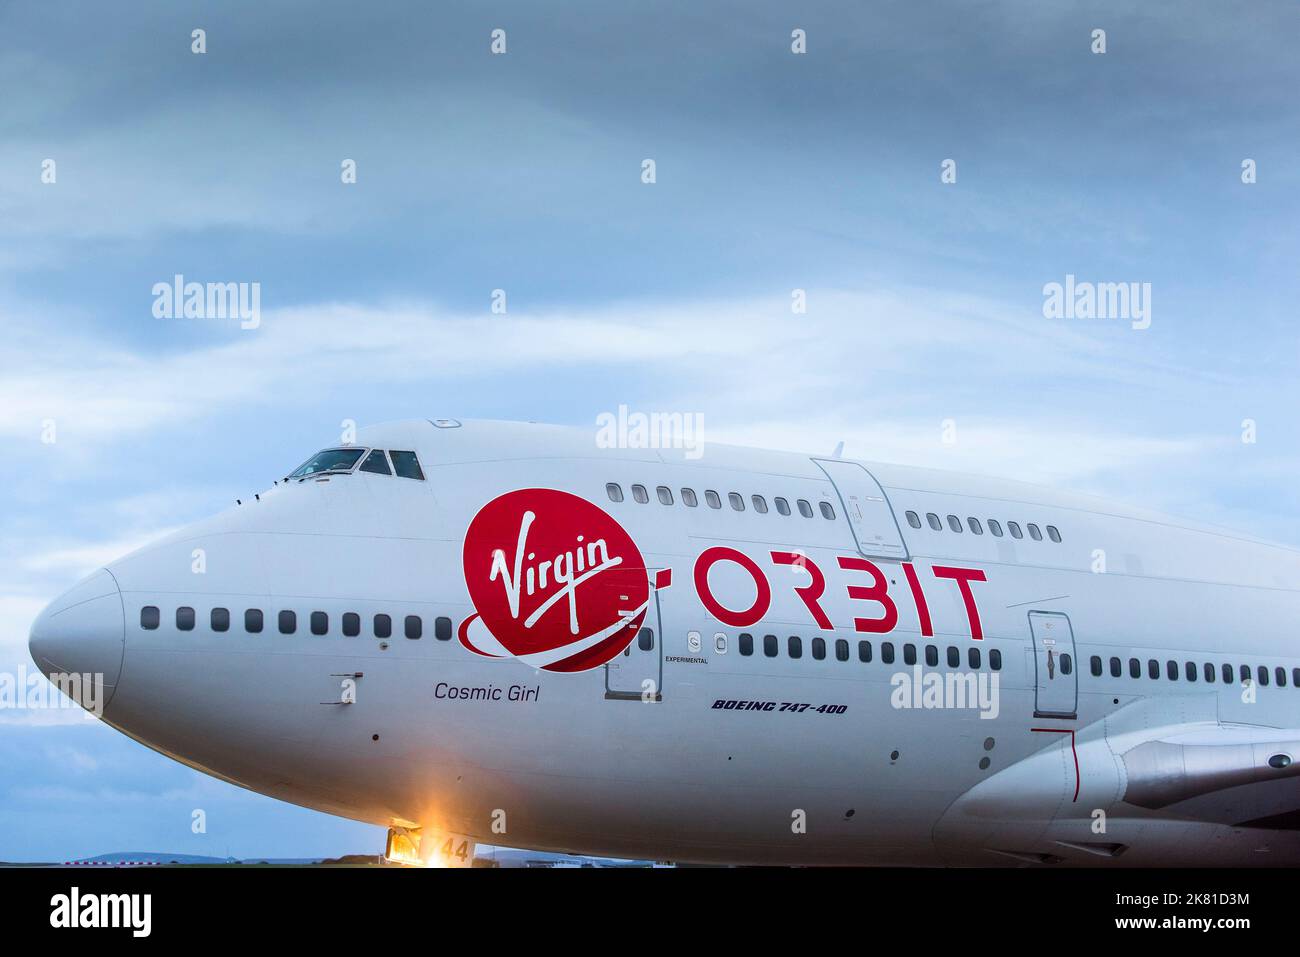 A closeup close up view of the Virgin logo on the fuselage of the Virgin Orbit, Cosmic Girl, a 747-400 converted to a rocket launch platform taxiing t Stock Photo